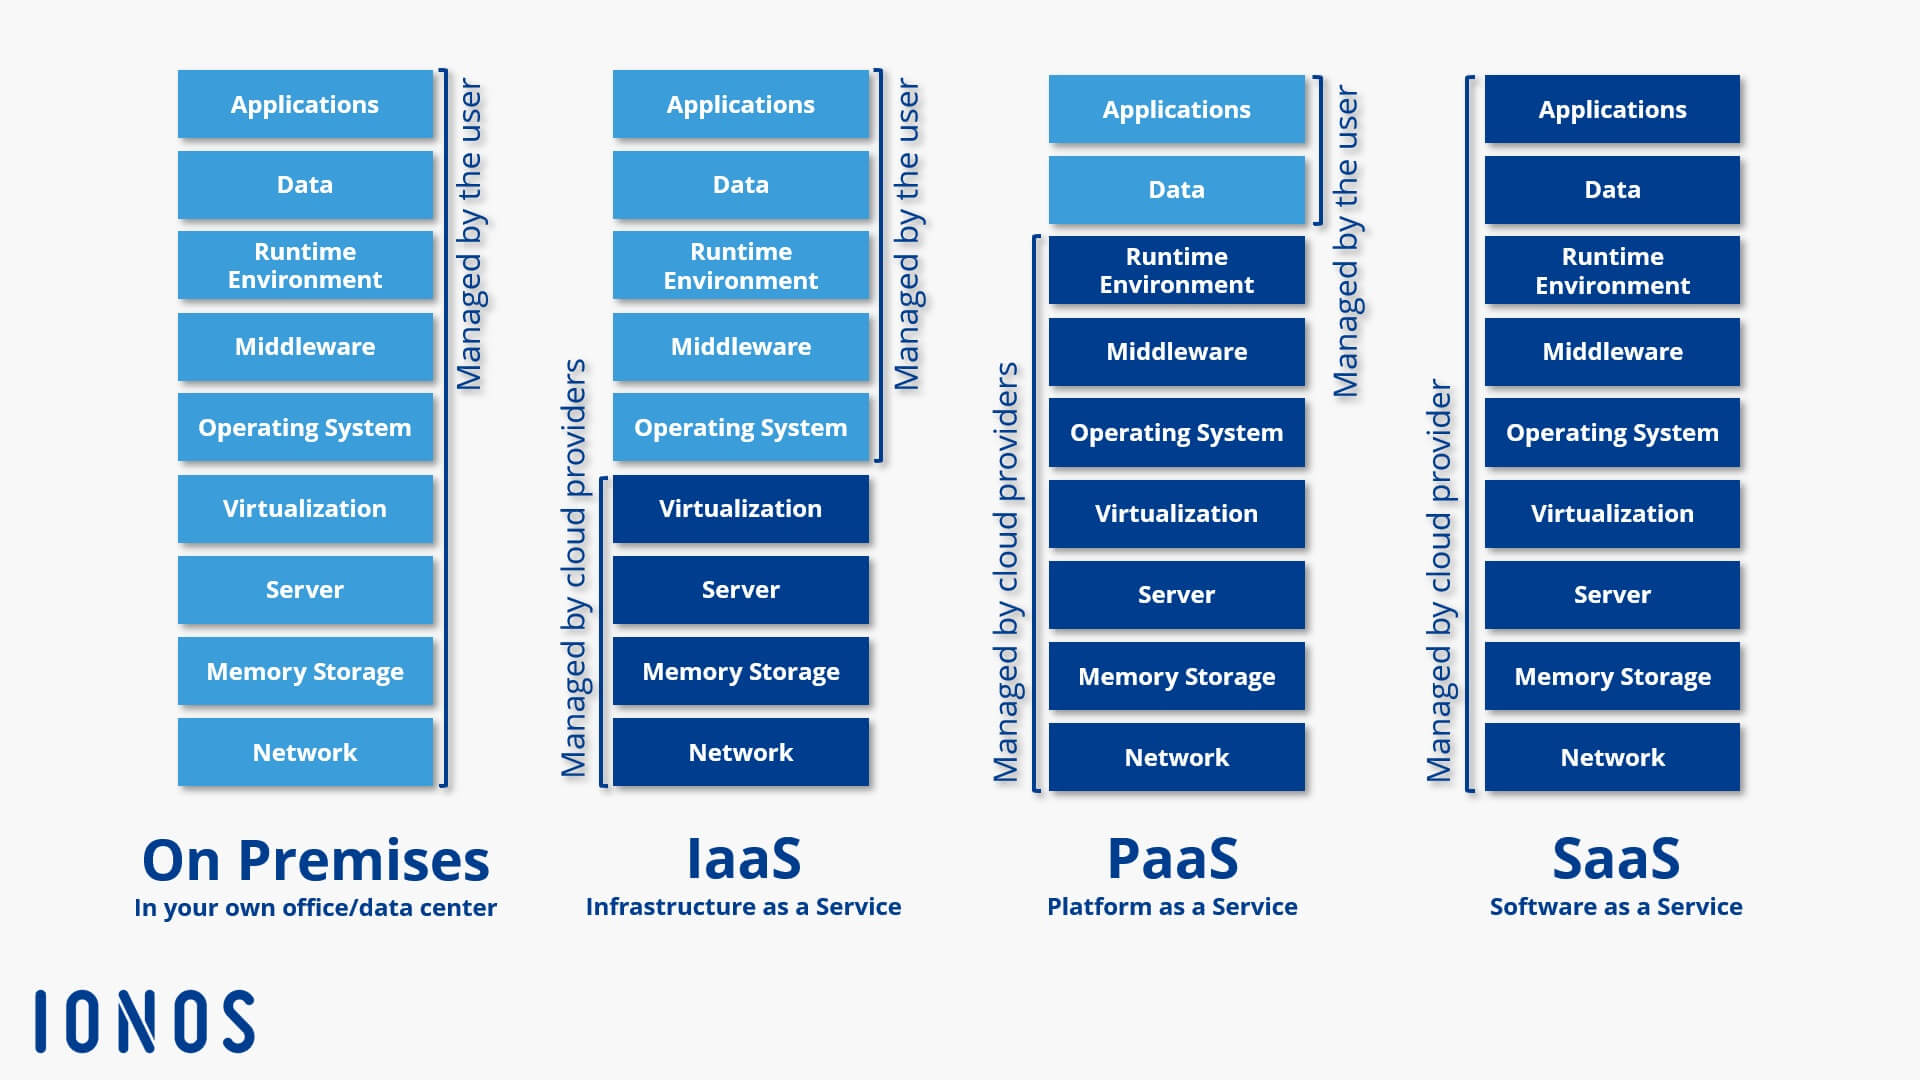 Schematic representation of the cloud service models IaaS, PaaS, and SaaS.